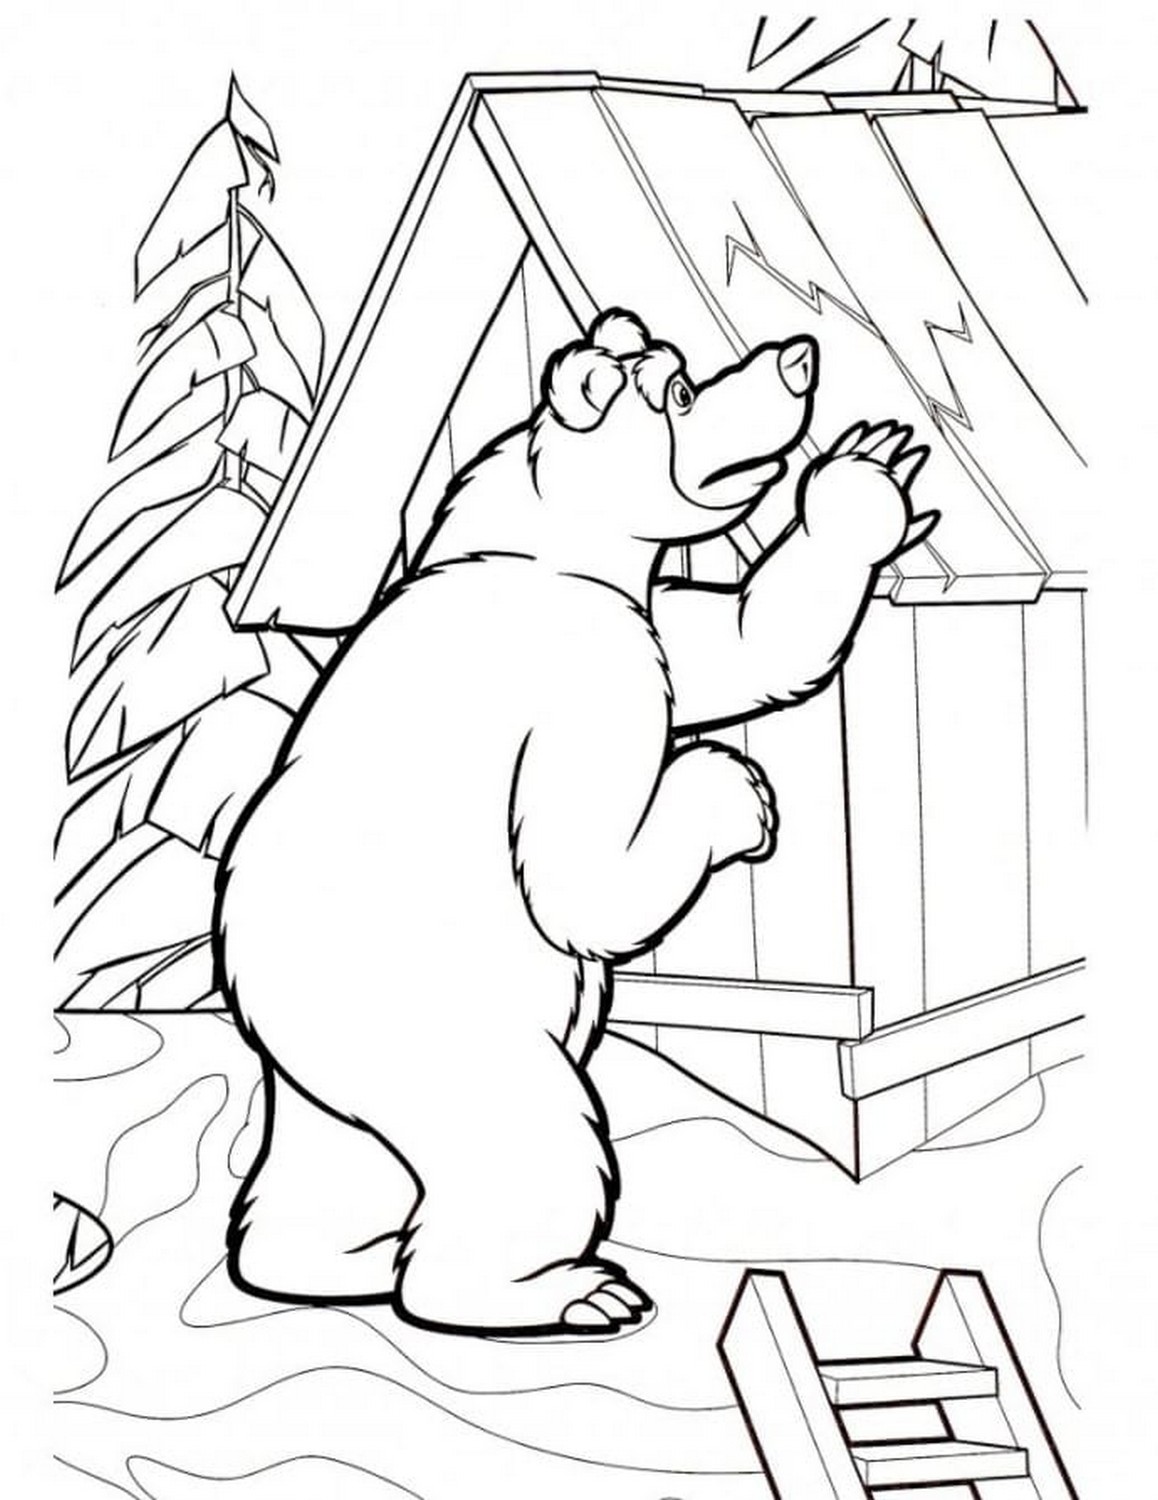 Drawing 19 of Masha and the Bear to print and color